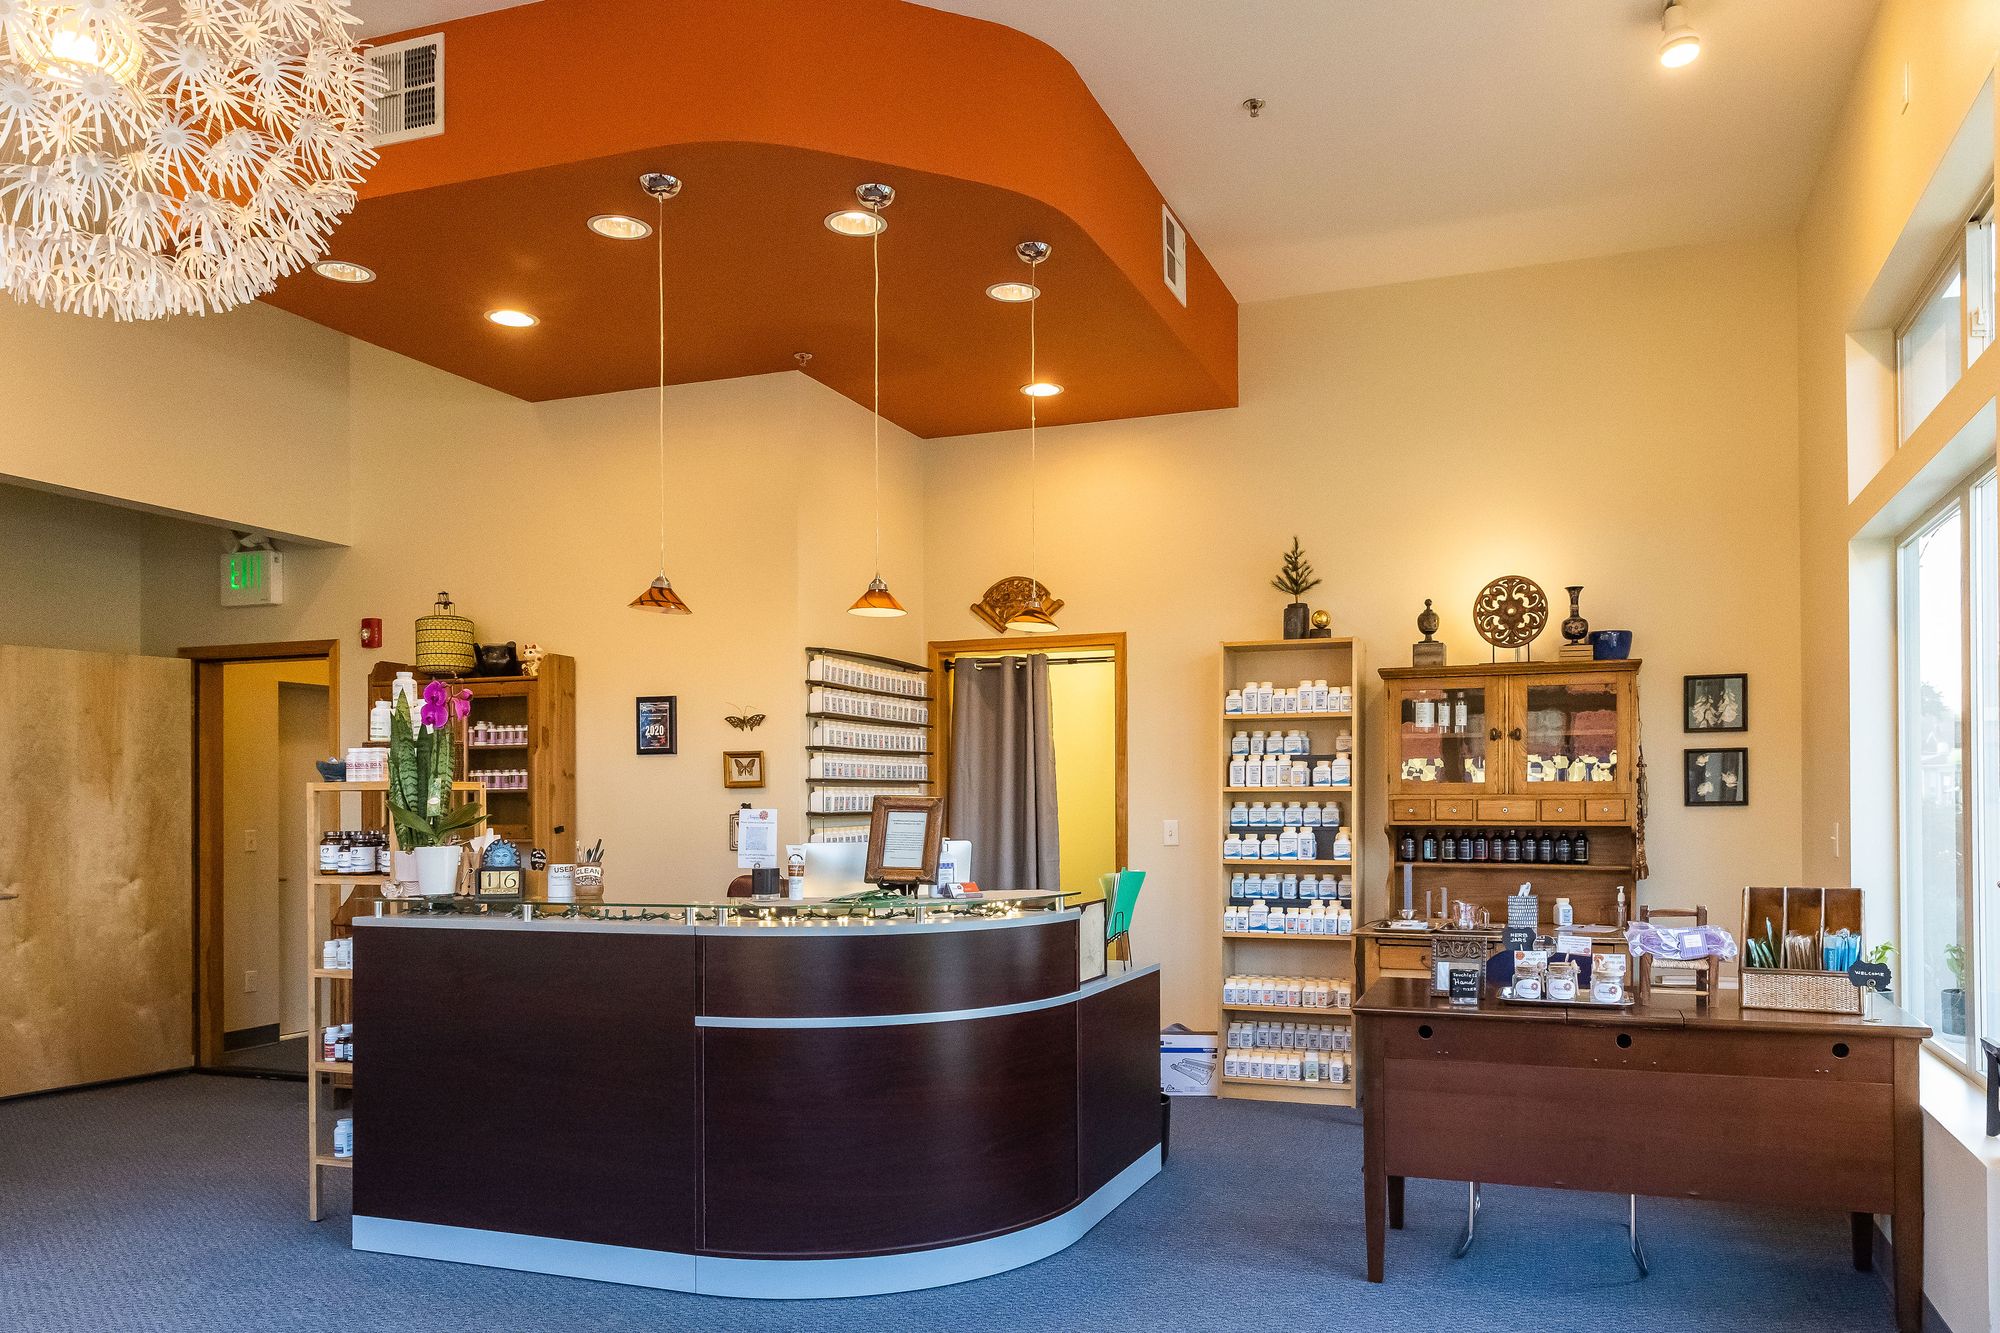 A Place to Heal, Grow & Thrive - Ballard Acupuncture Center